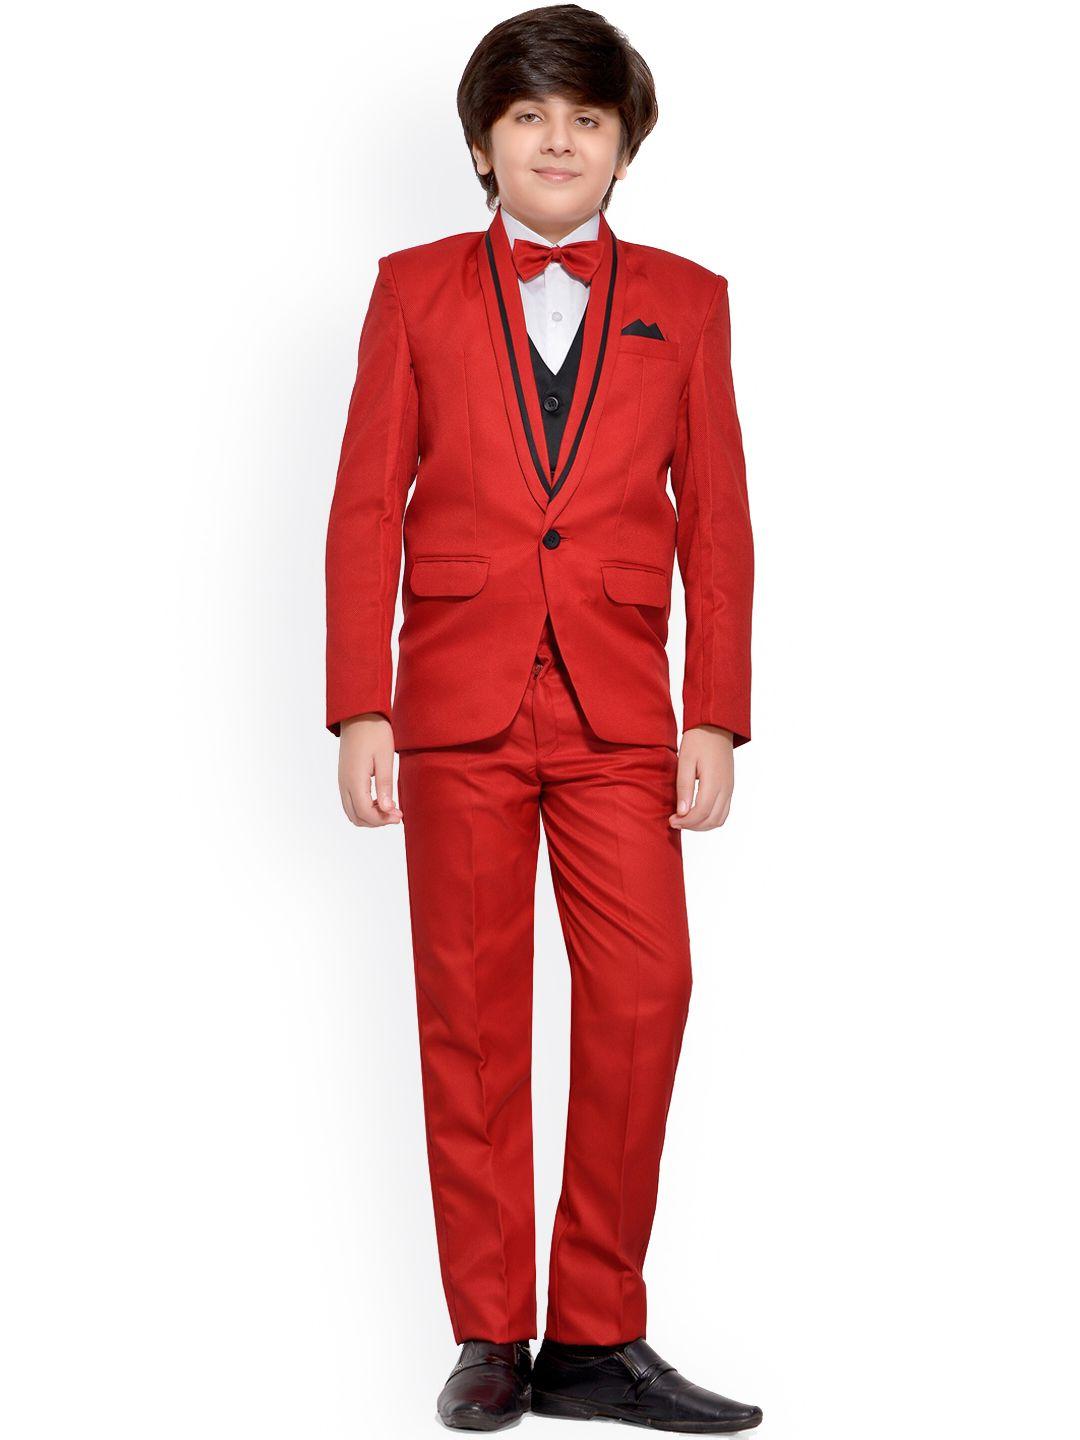 jeetethnics boys red 5-piece single-breasted partywear suit